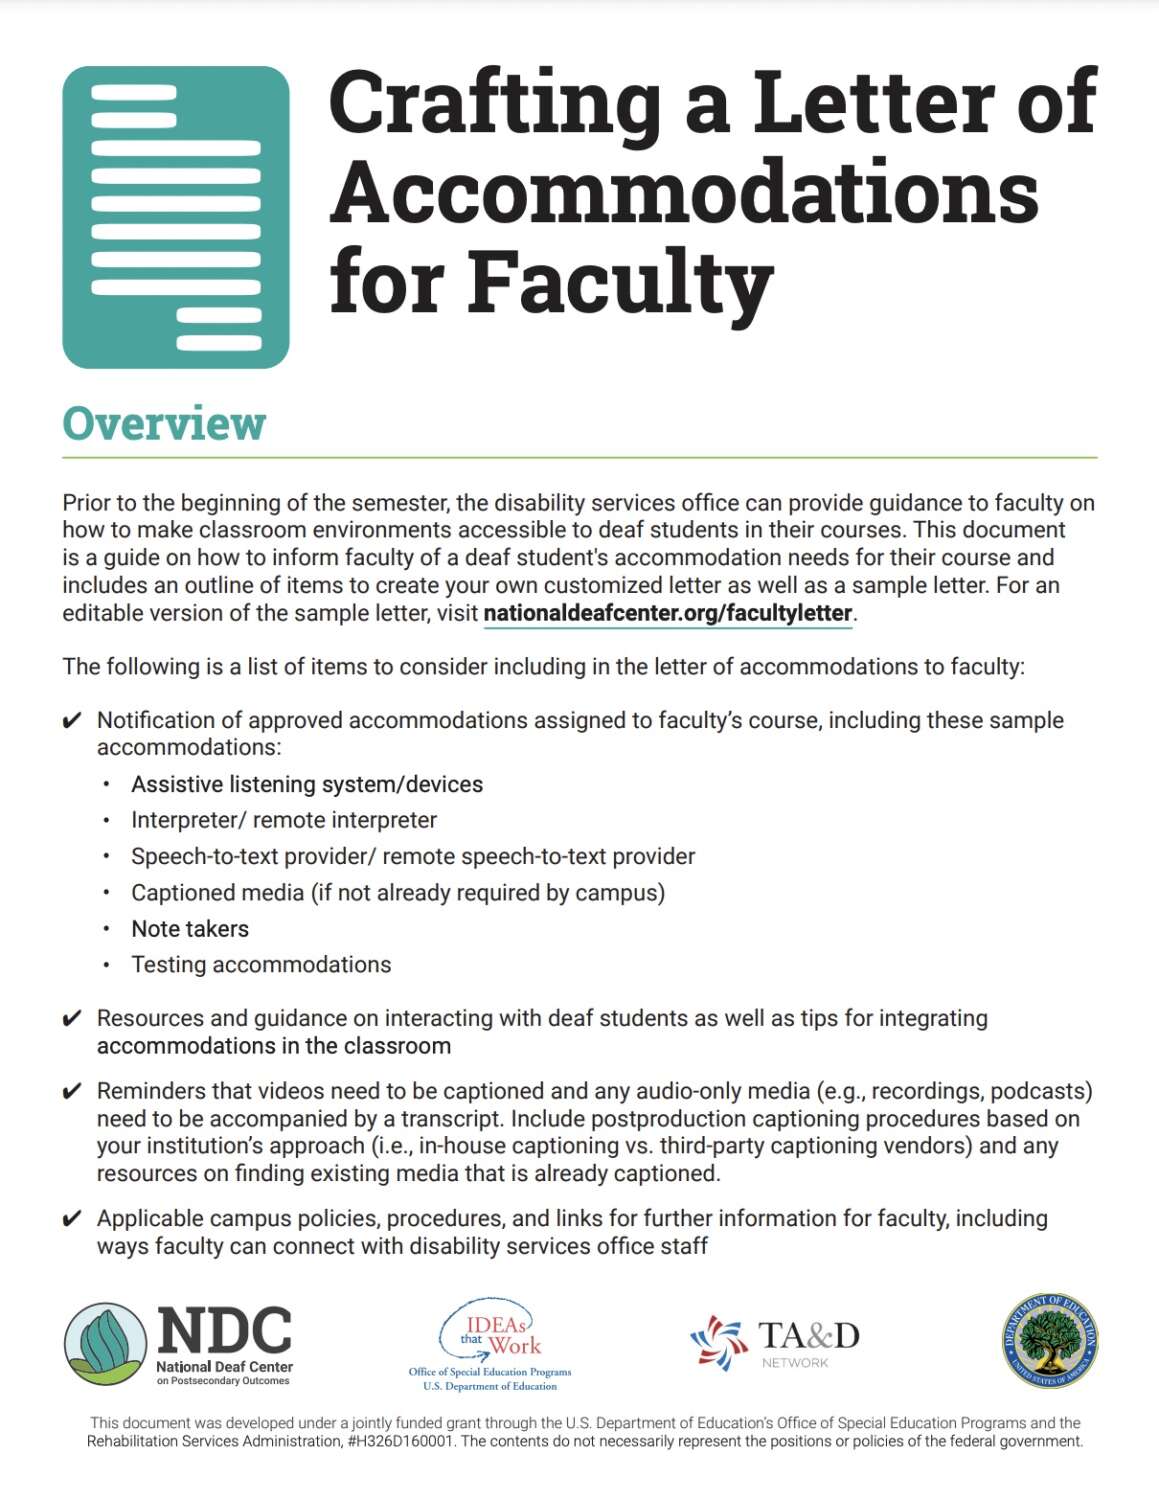 The image is a screenshot of a document titled "Crafting a Letter of Accommodations for Faculty," providing guidance to faculty on making classroom environments accessible to deaf students. It includes a list of items to consider in the letter of accommodations, resources for interacting with deaf students, and reminders about captioning media and audio-only materials. The document also outlines campus policies, procedures, and links for further information for faculty.